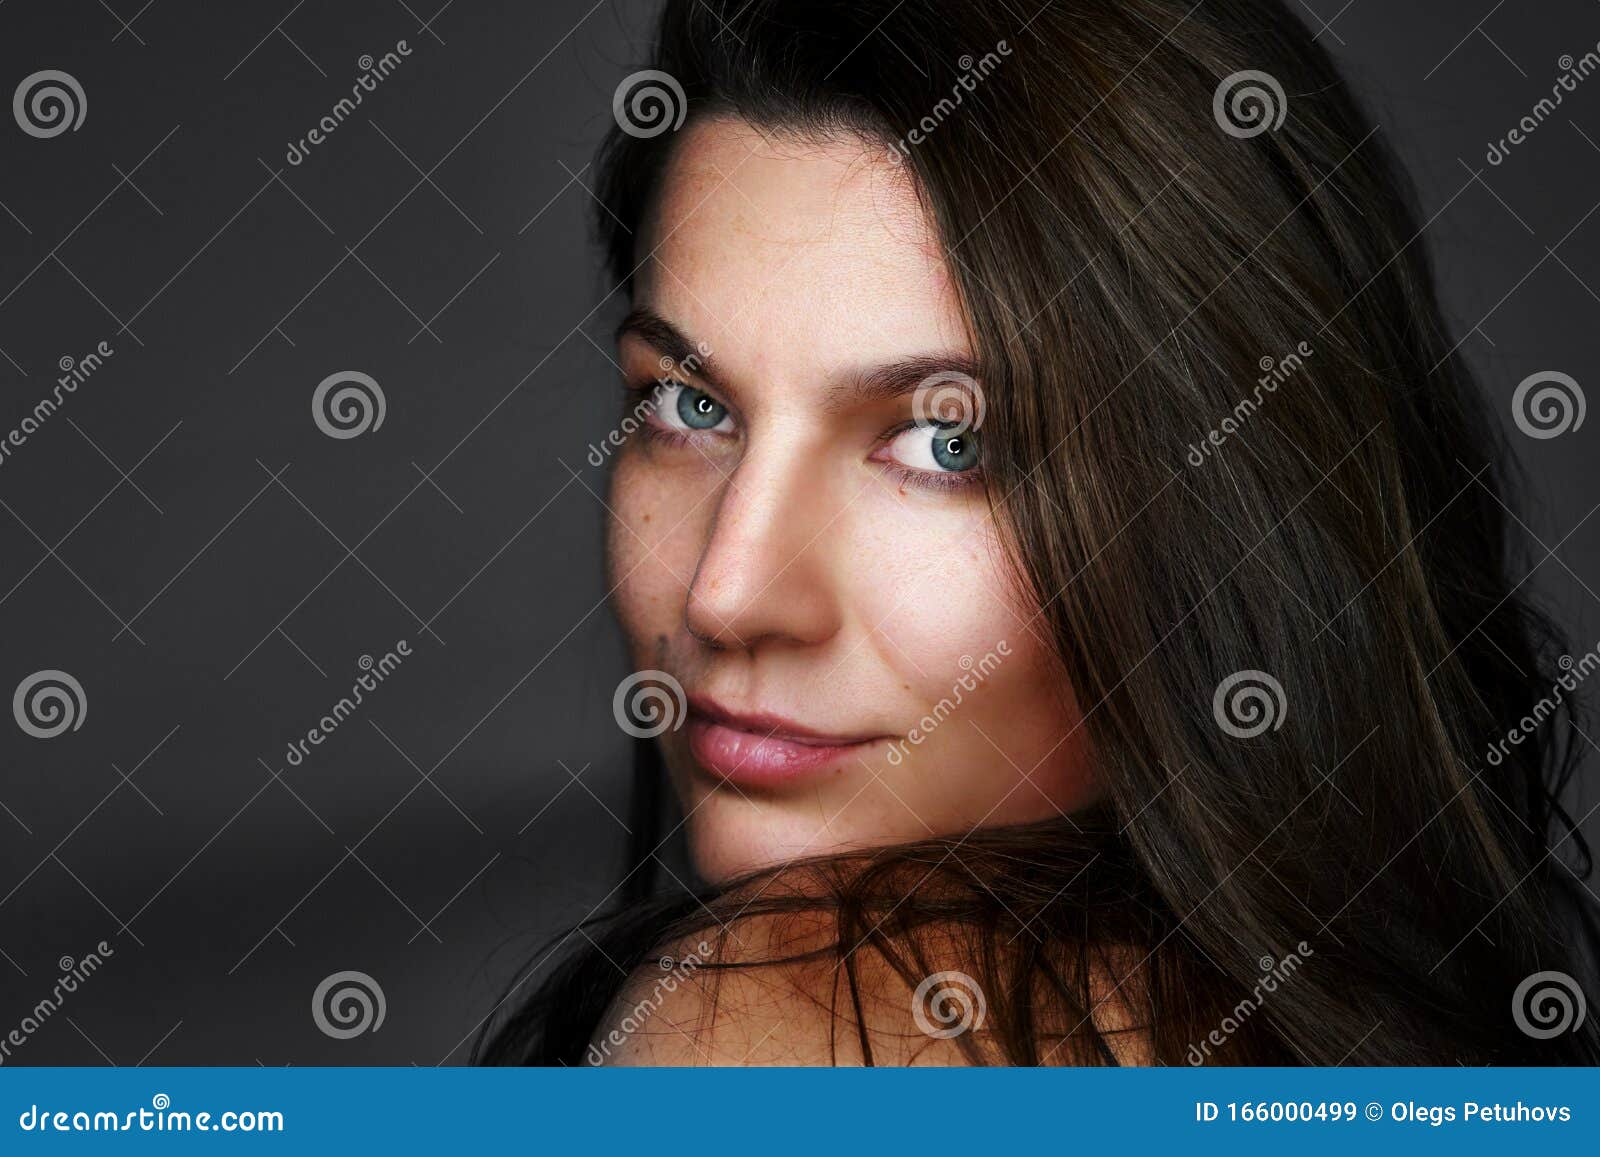 1. "Dark-haired woman with piercing blue eyes" - wide 9